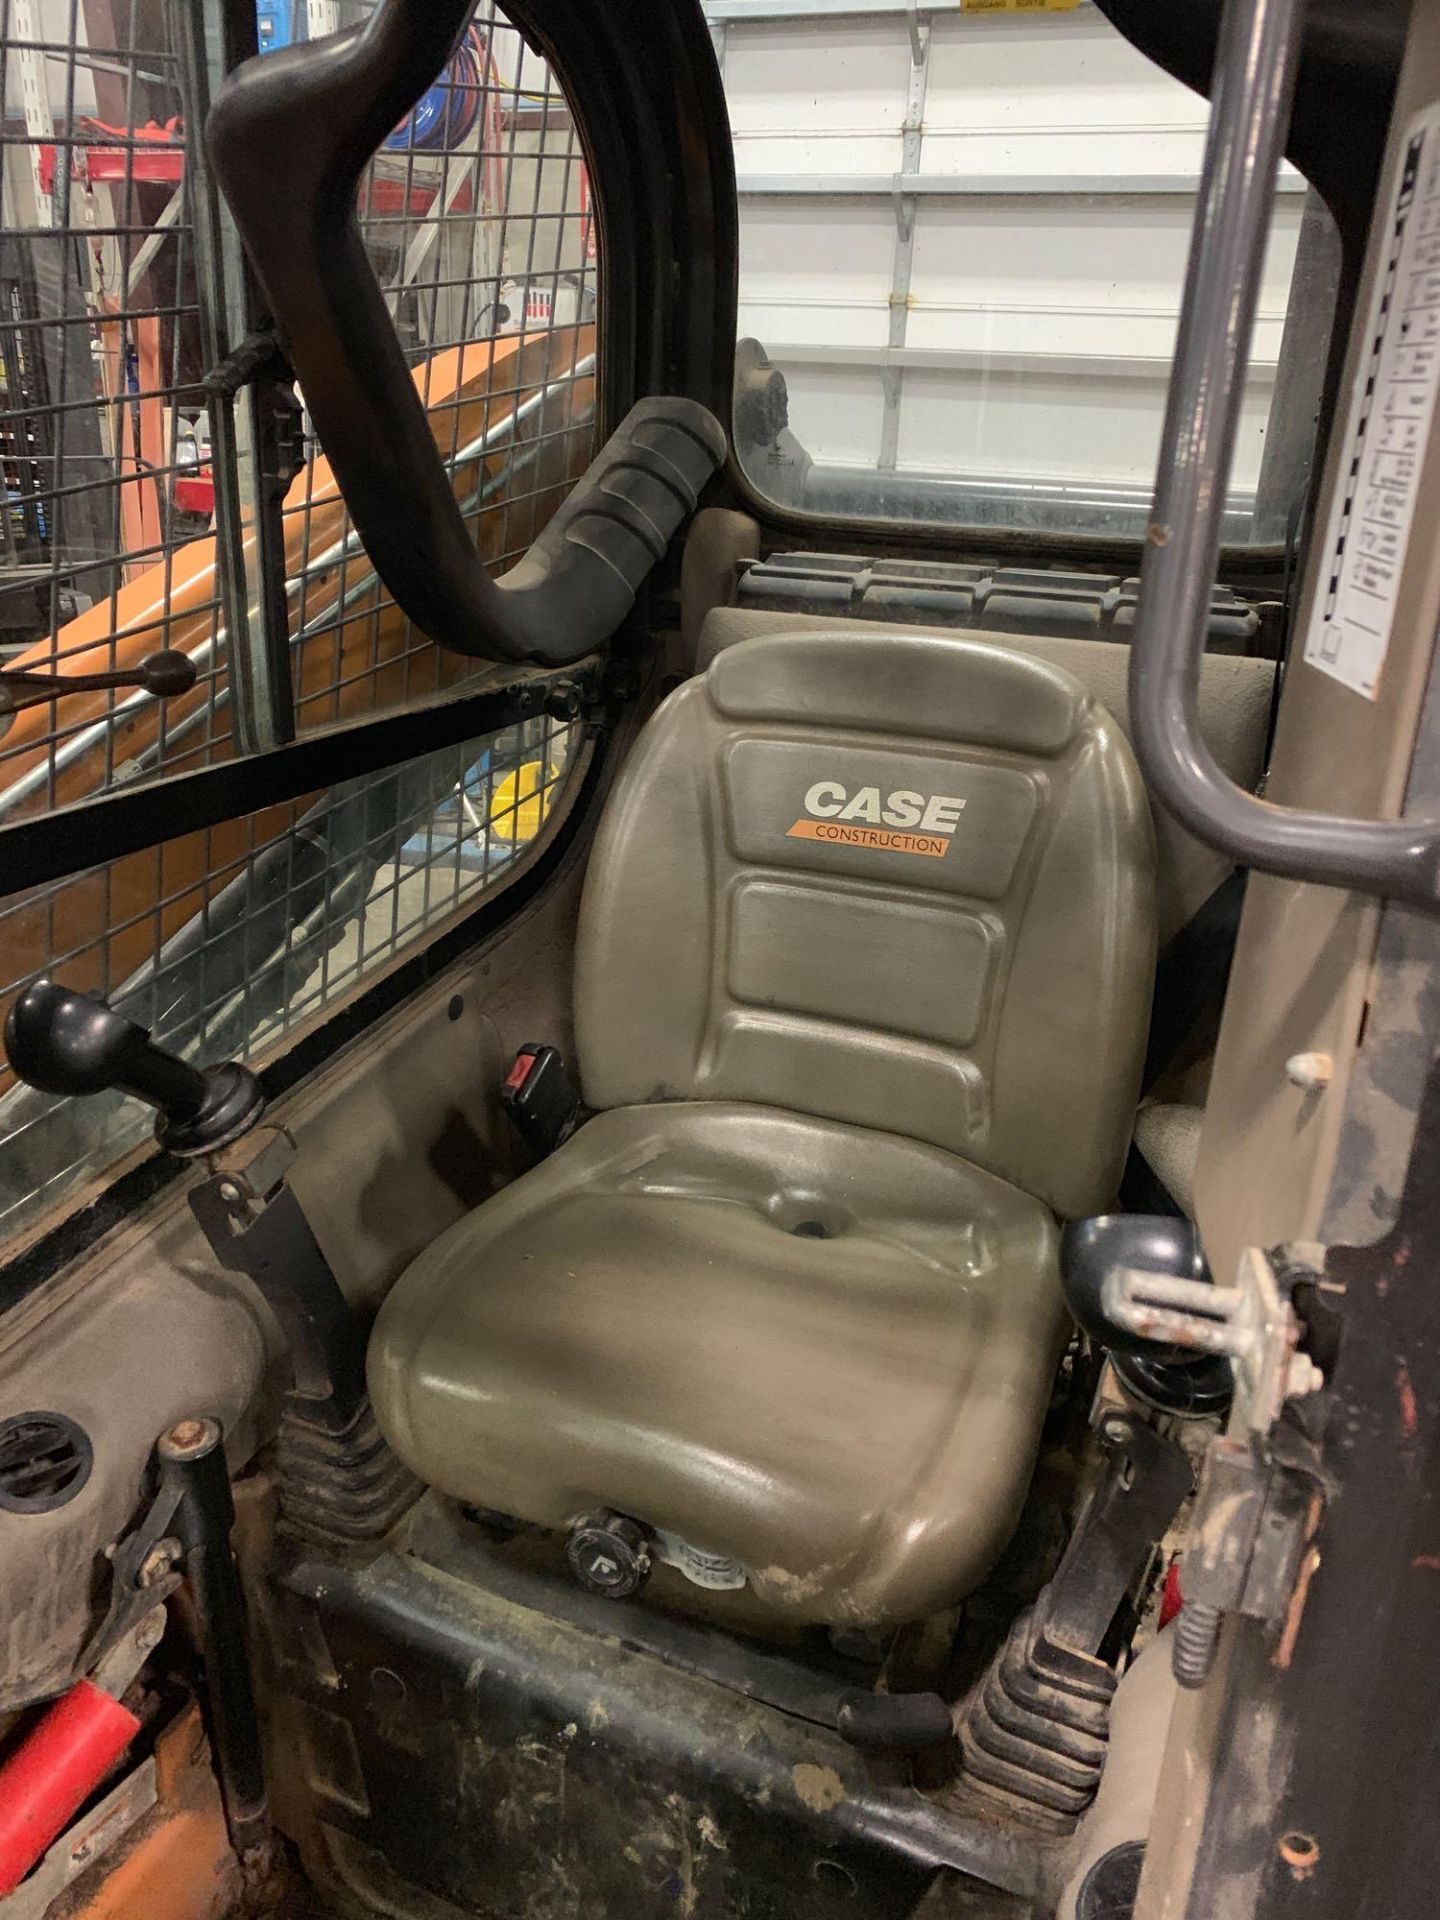 2013 CASE SV300 DIESEL SKID STEER, ENCLOSED CAB, RIDE CONTROL, HEAT, A/C, AUXILIARY HYDRAULICS, RADI - Image 5 of 8